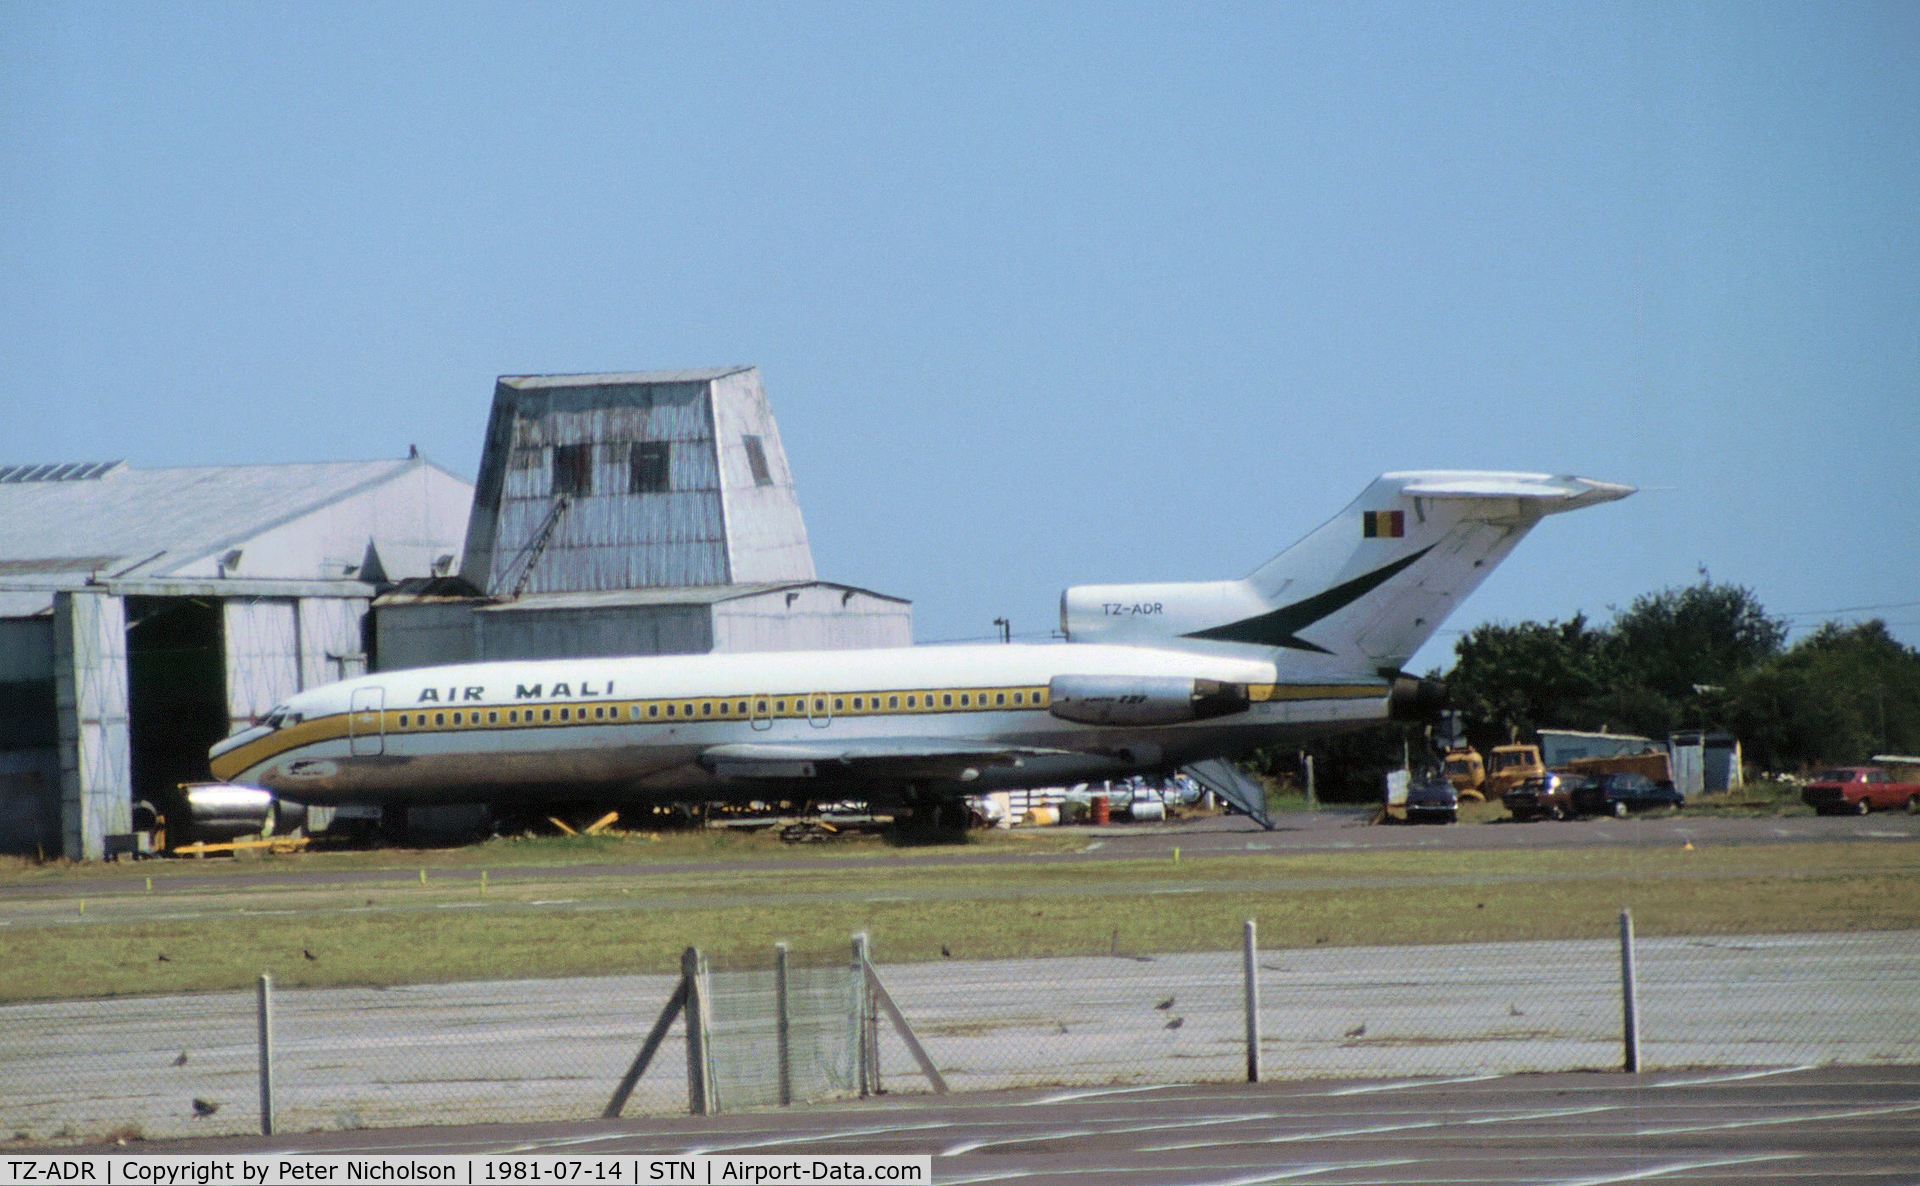 TZ-ADR, 1967 Boeing 727-173C C/N 19509, Boeing 727-173C of Air Mali as seen at Stansted in the Summer of 1981.